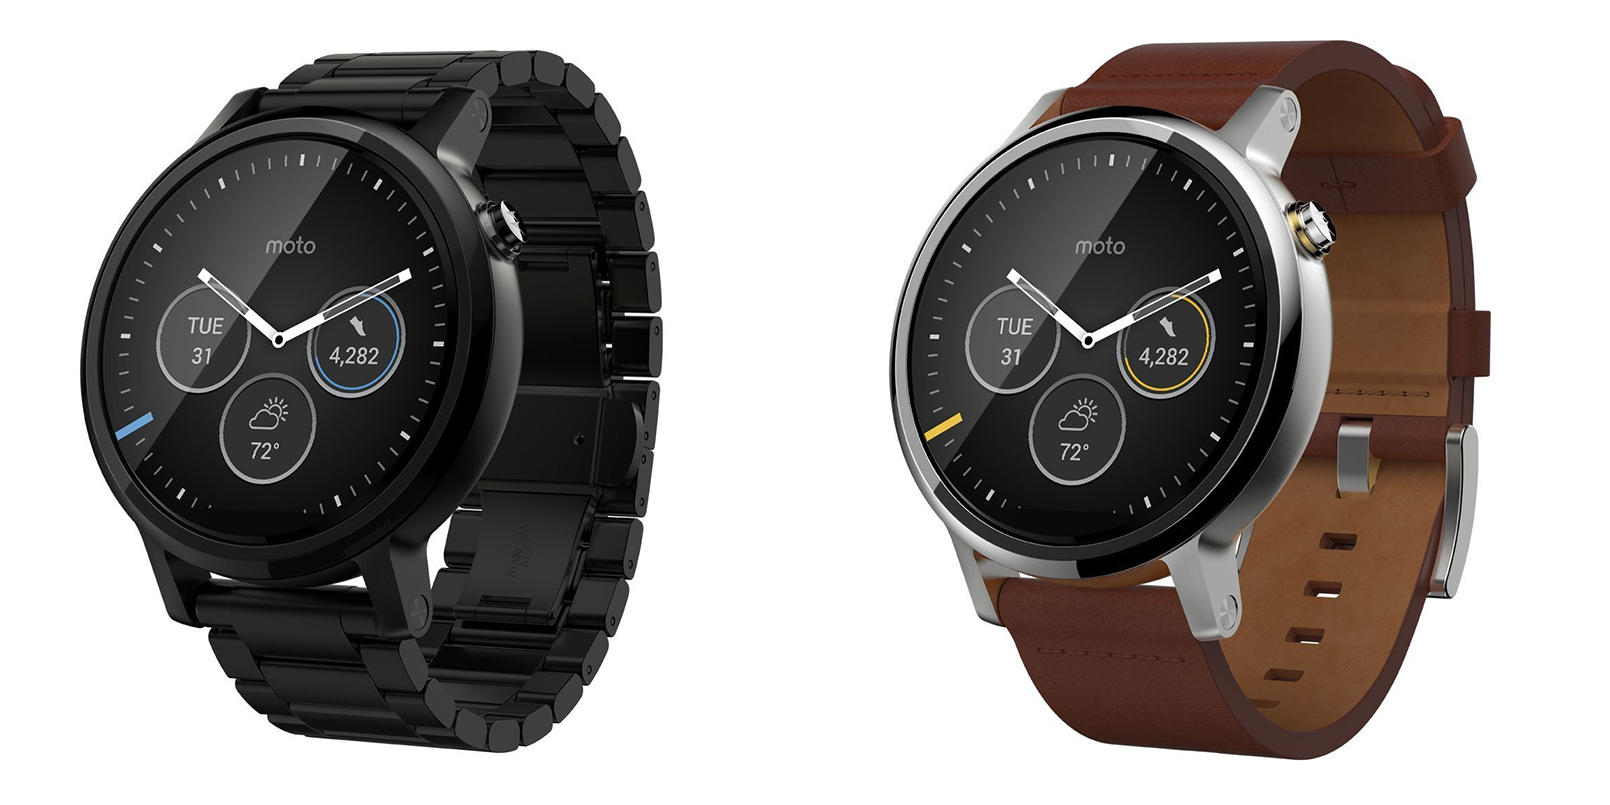 Måler have tillid sejr The Moto 360 2nd Gen. Smart Watch connects to your Android or iOS device  for $200 shipped (Reg. $300)